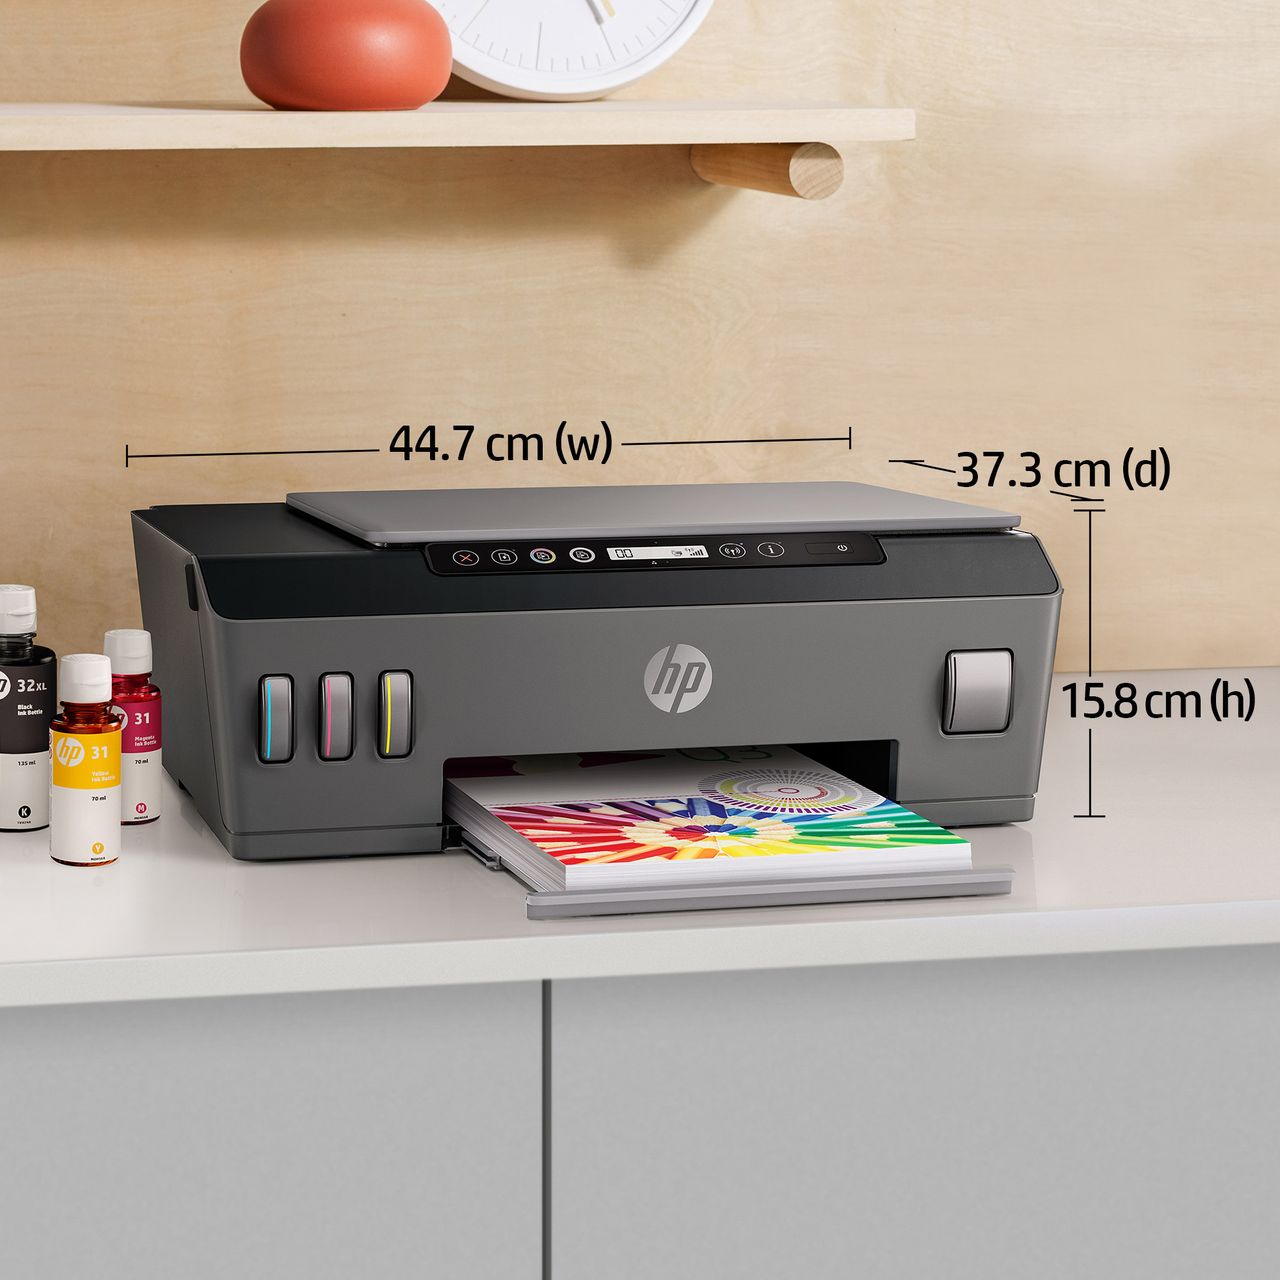 HP ENVY Inspire 7220e All-in-One Printer - Specifications